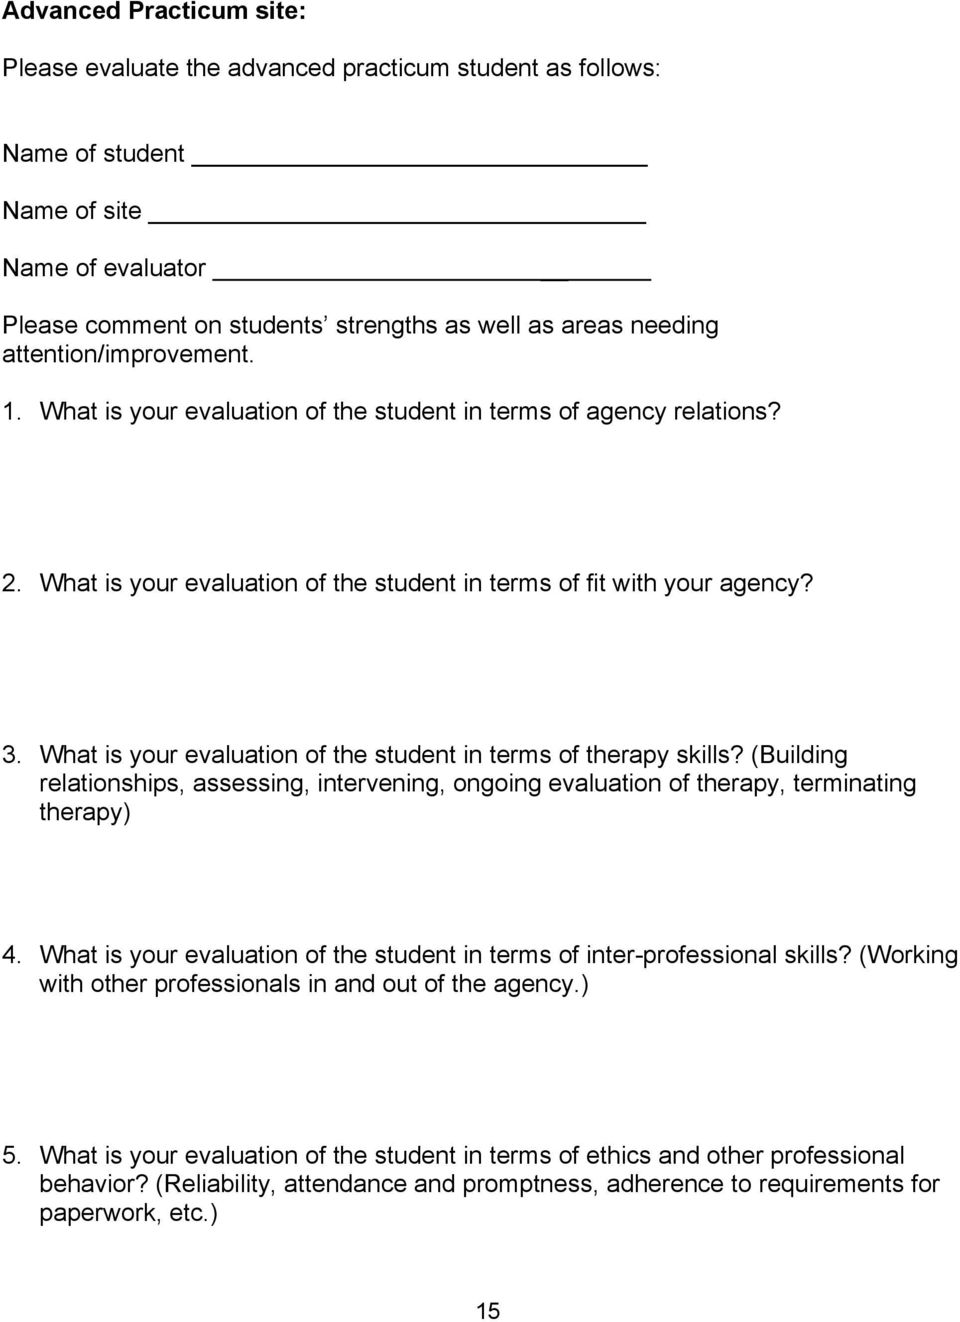 What is your evaluation of the student in terms of therapy skills? (Building relationships, assessing, intervening, ongoing evaluation of therapy, terminating therapy) 4.